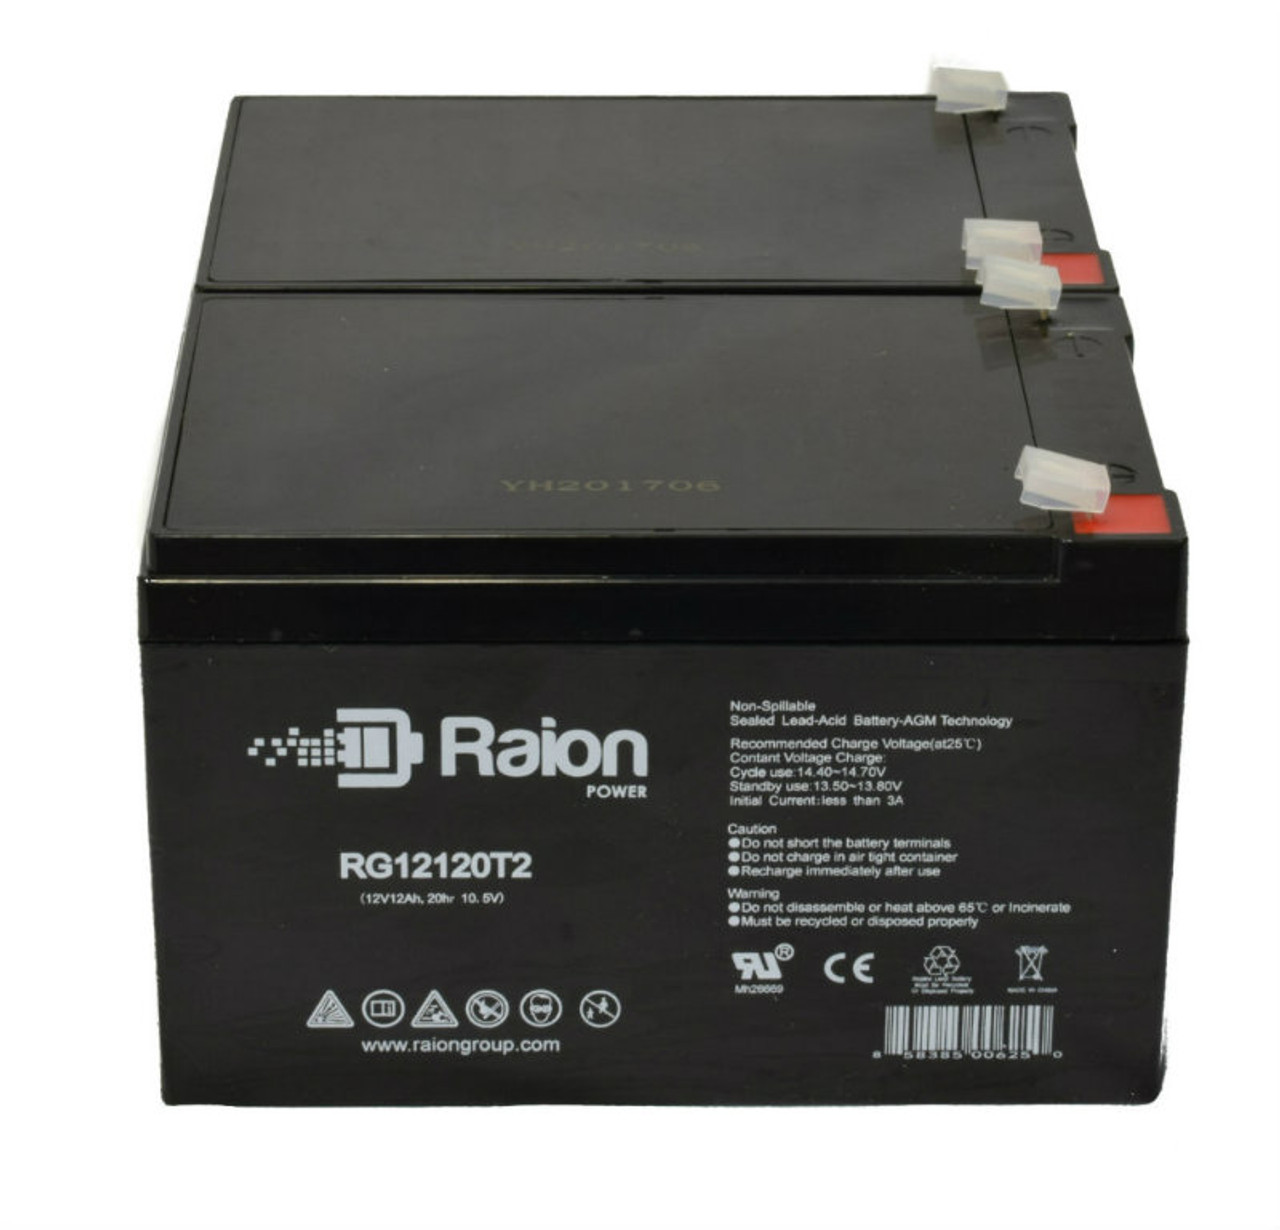 Raion Power RG12120T2 12V 12Ah Replacement Medical Equipment Battery for Hill-Rom Intellidrive 139111 - 2 Pack